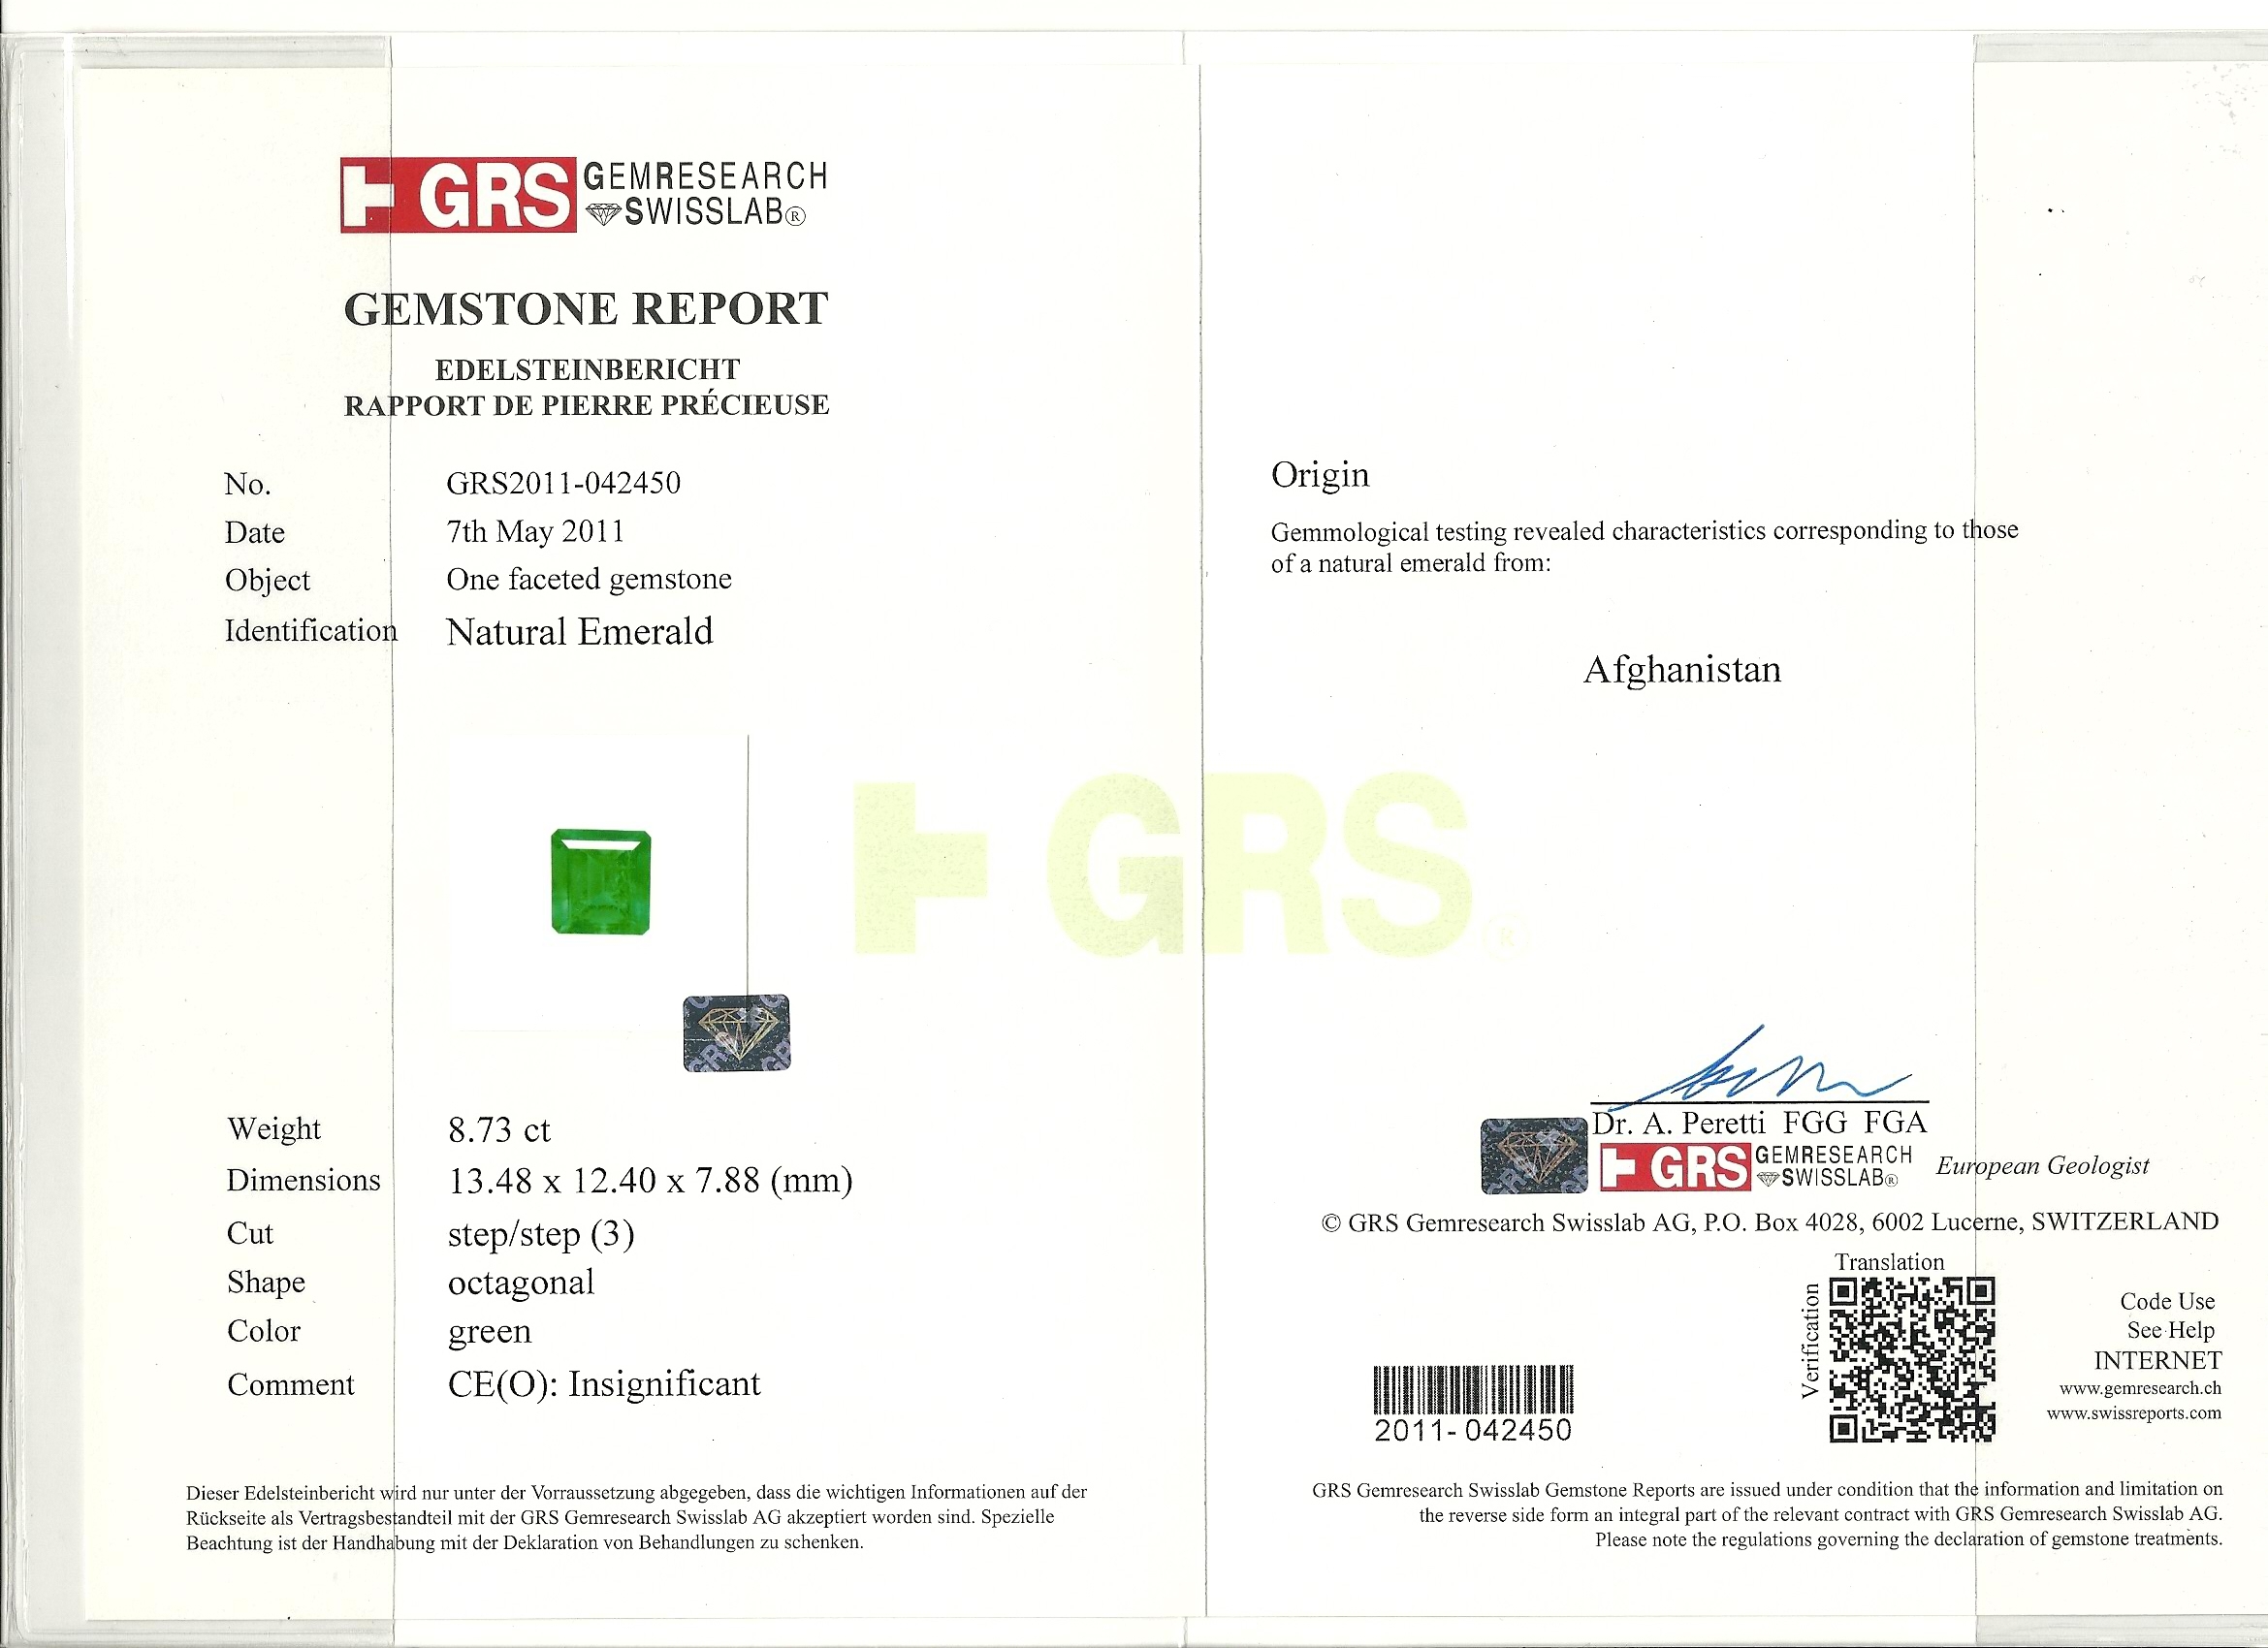 Emerald certificate issued by GRS